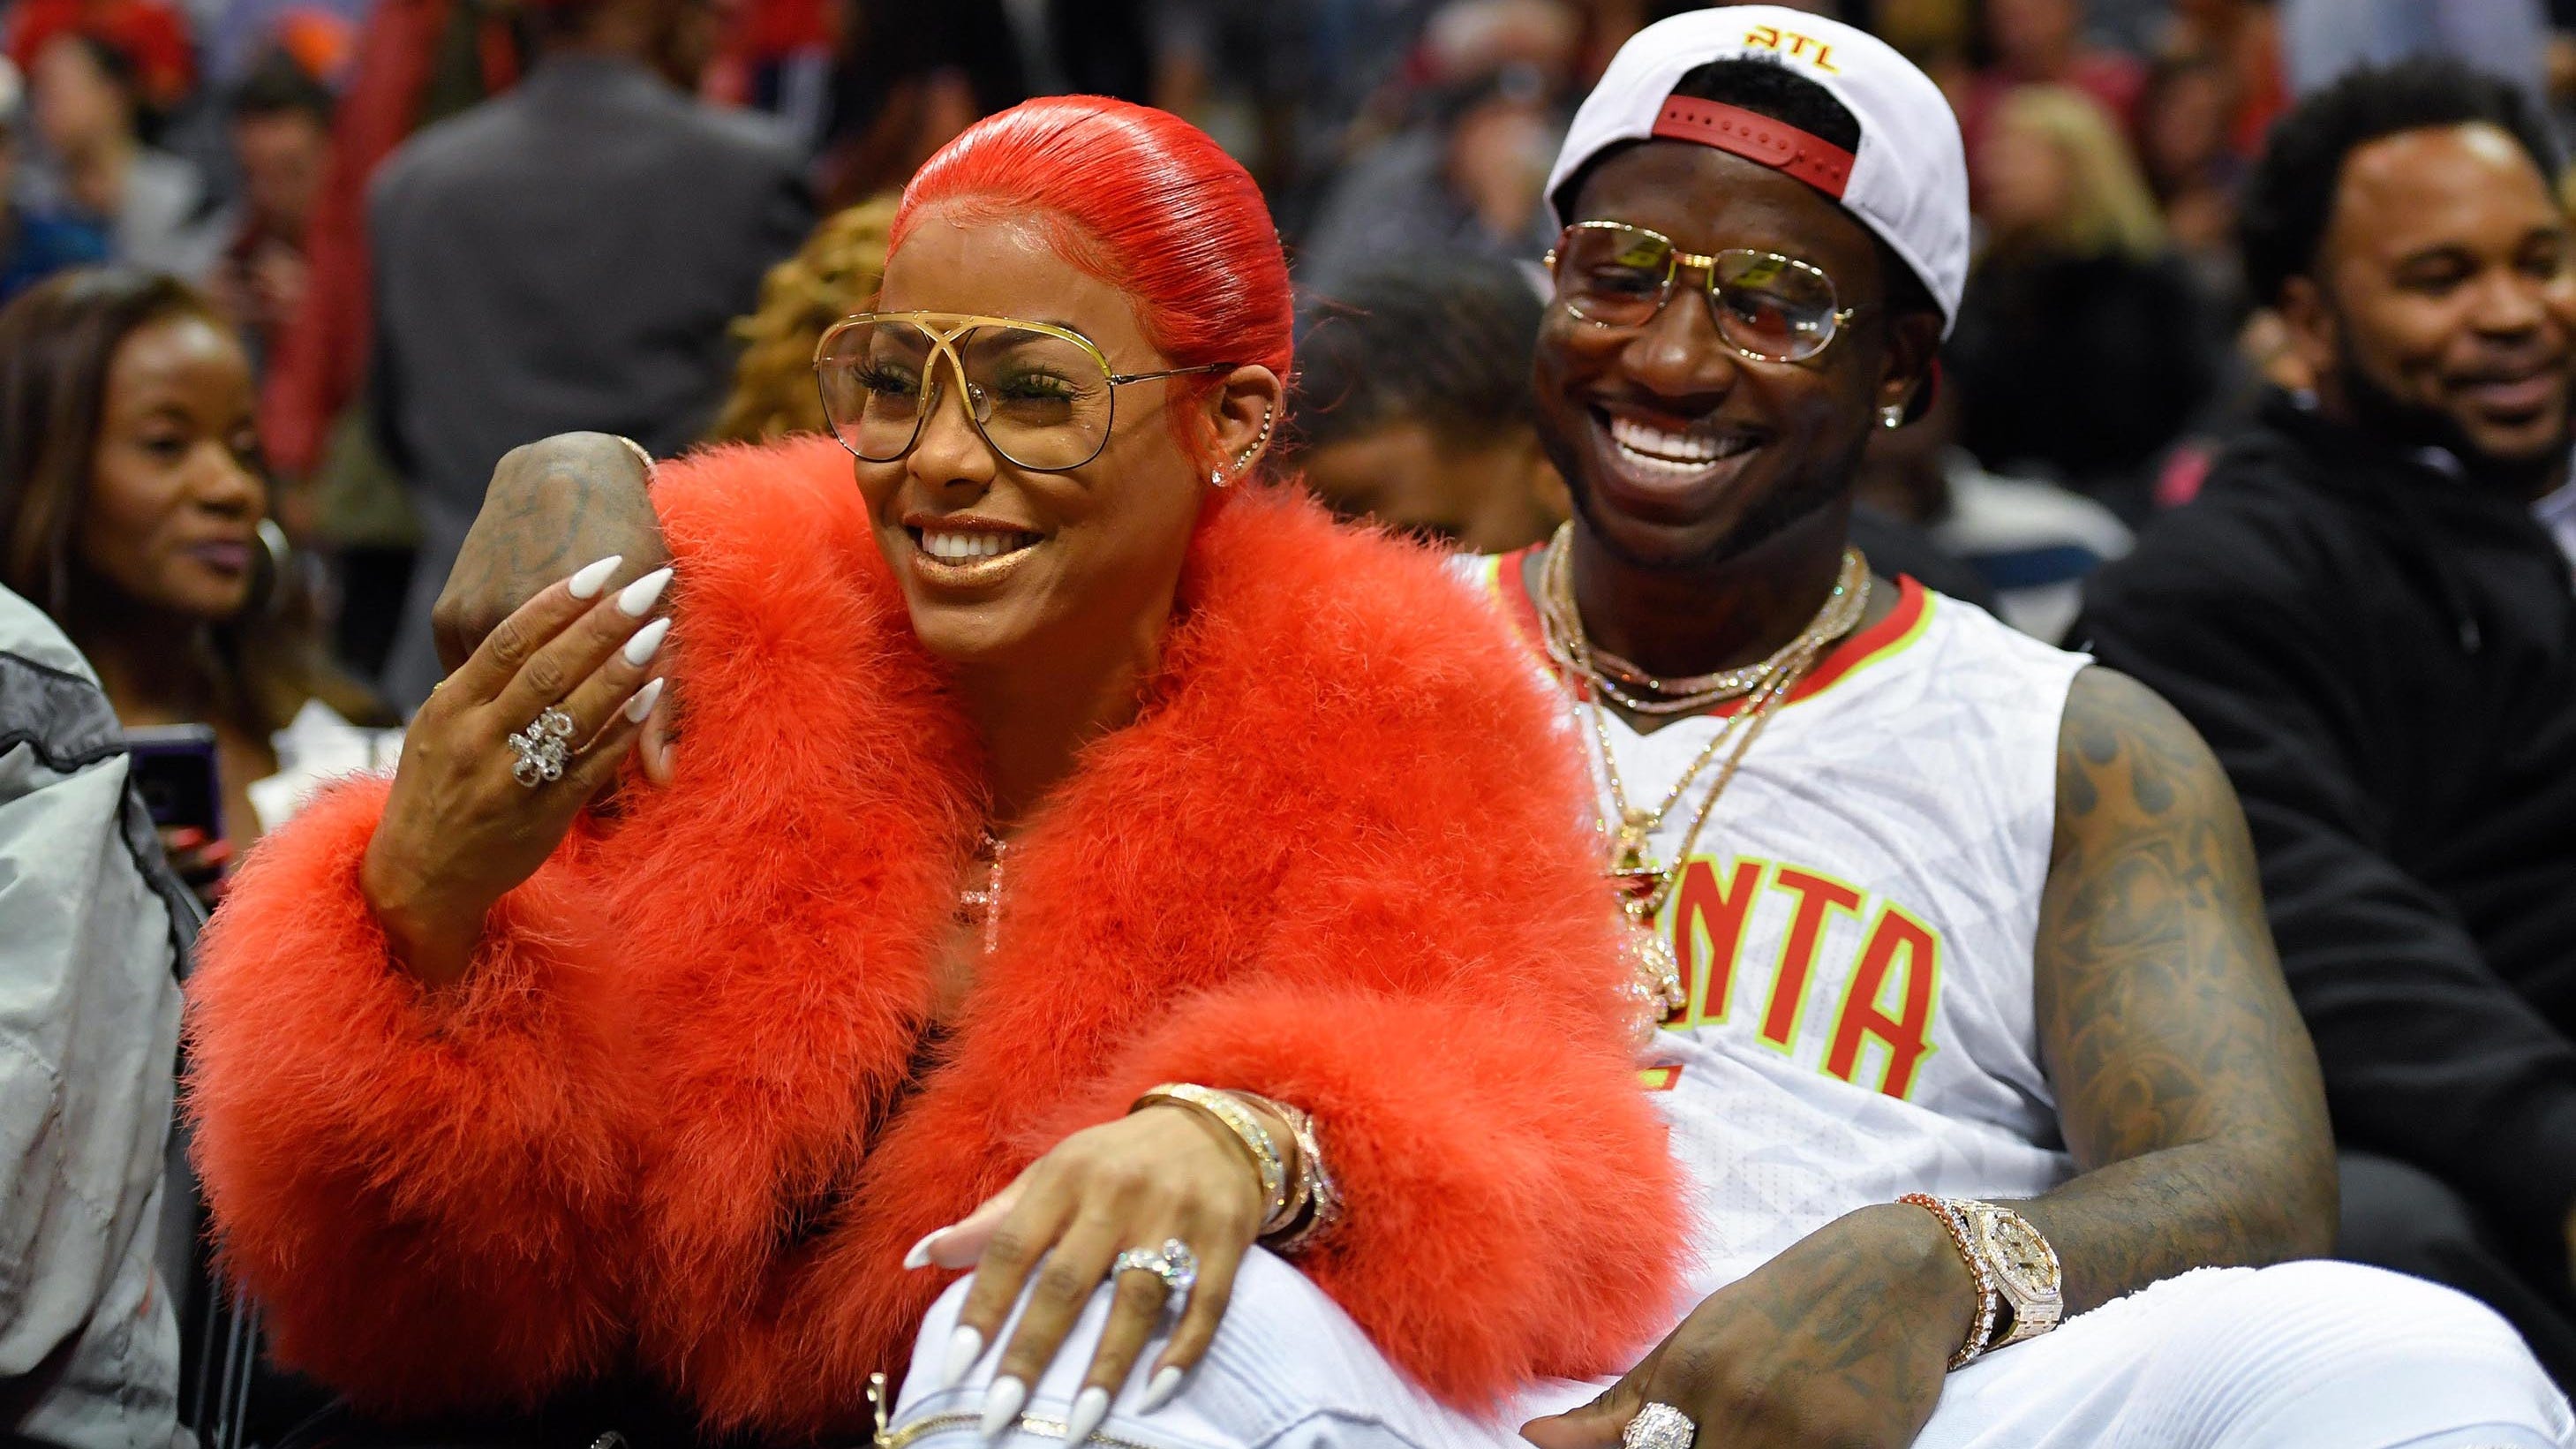 Gucci Mane proposed girlfriend at game